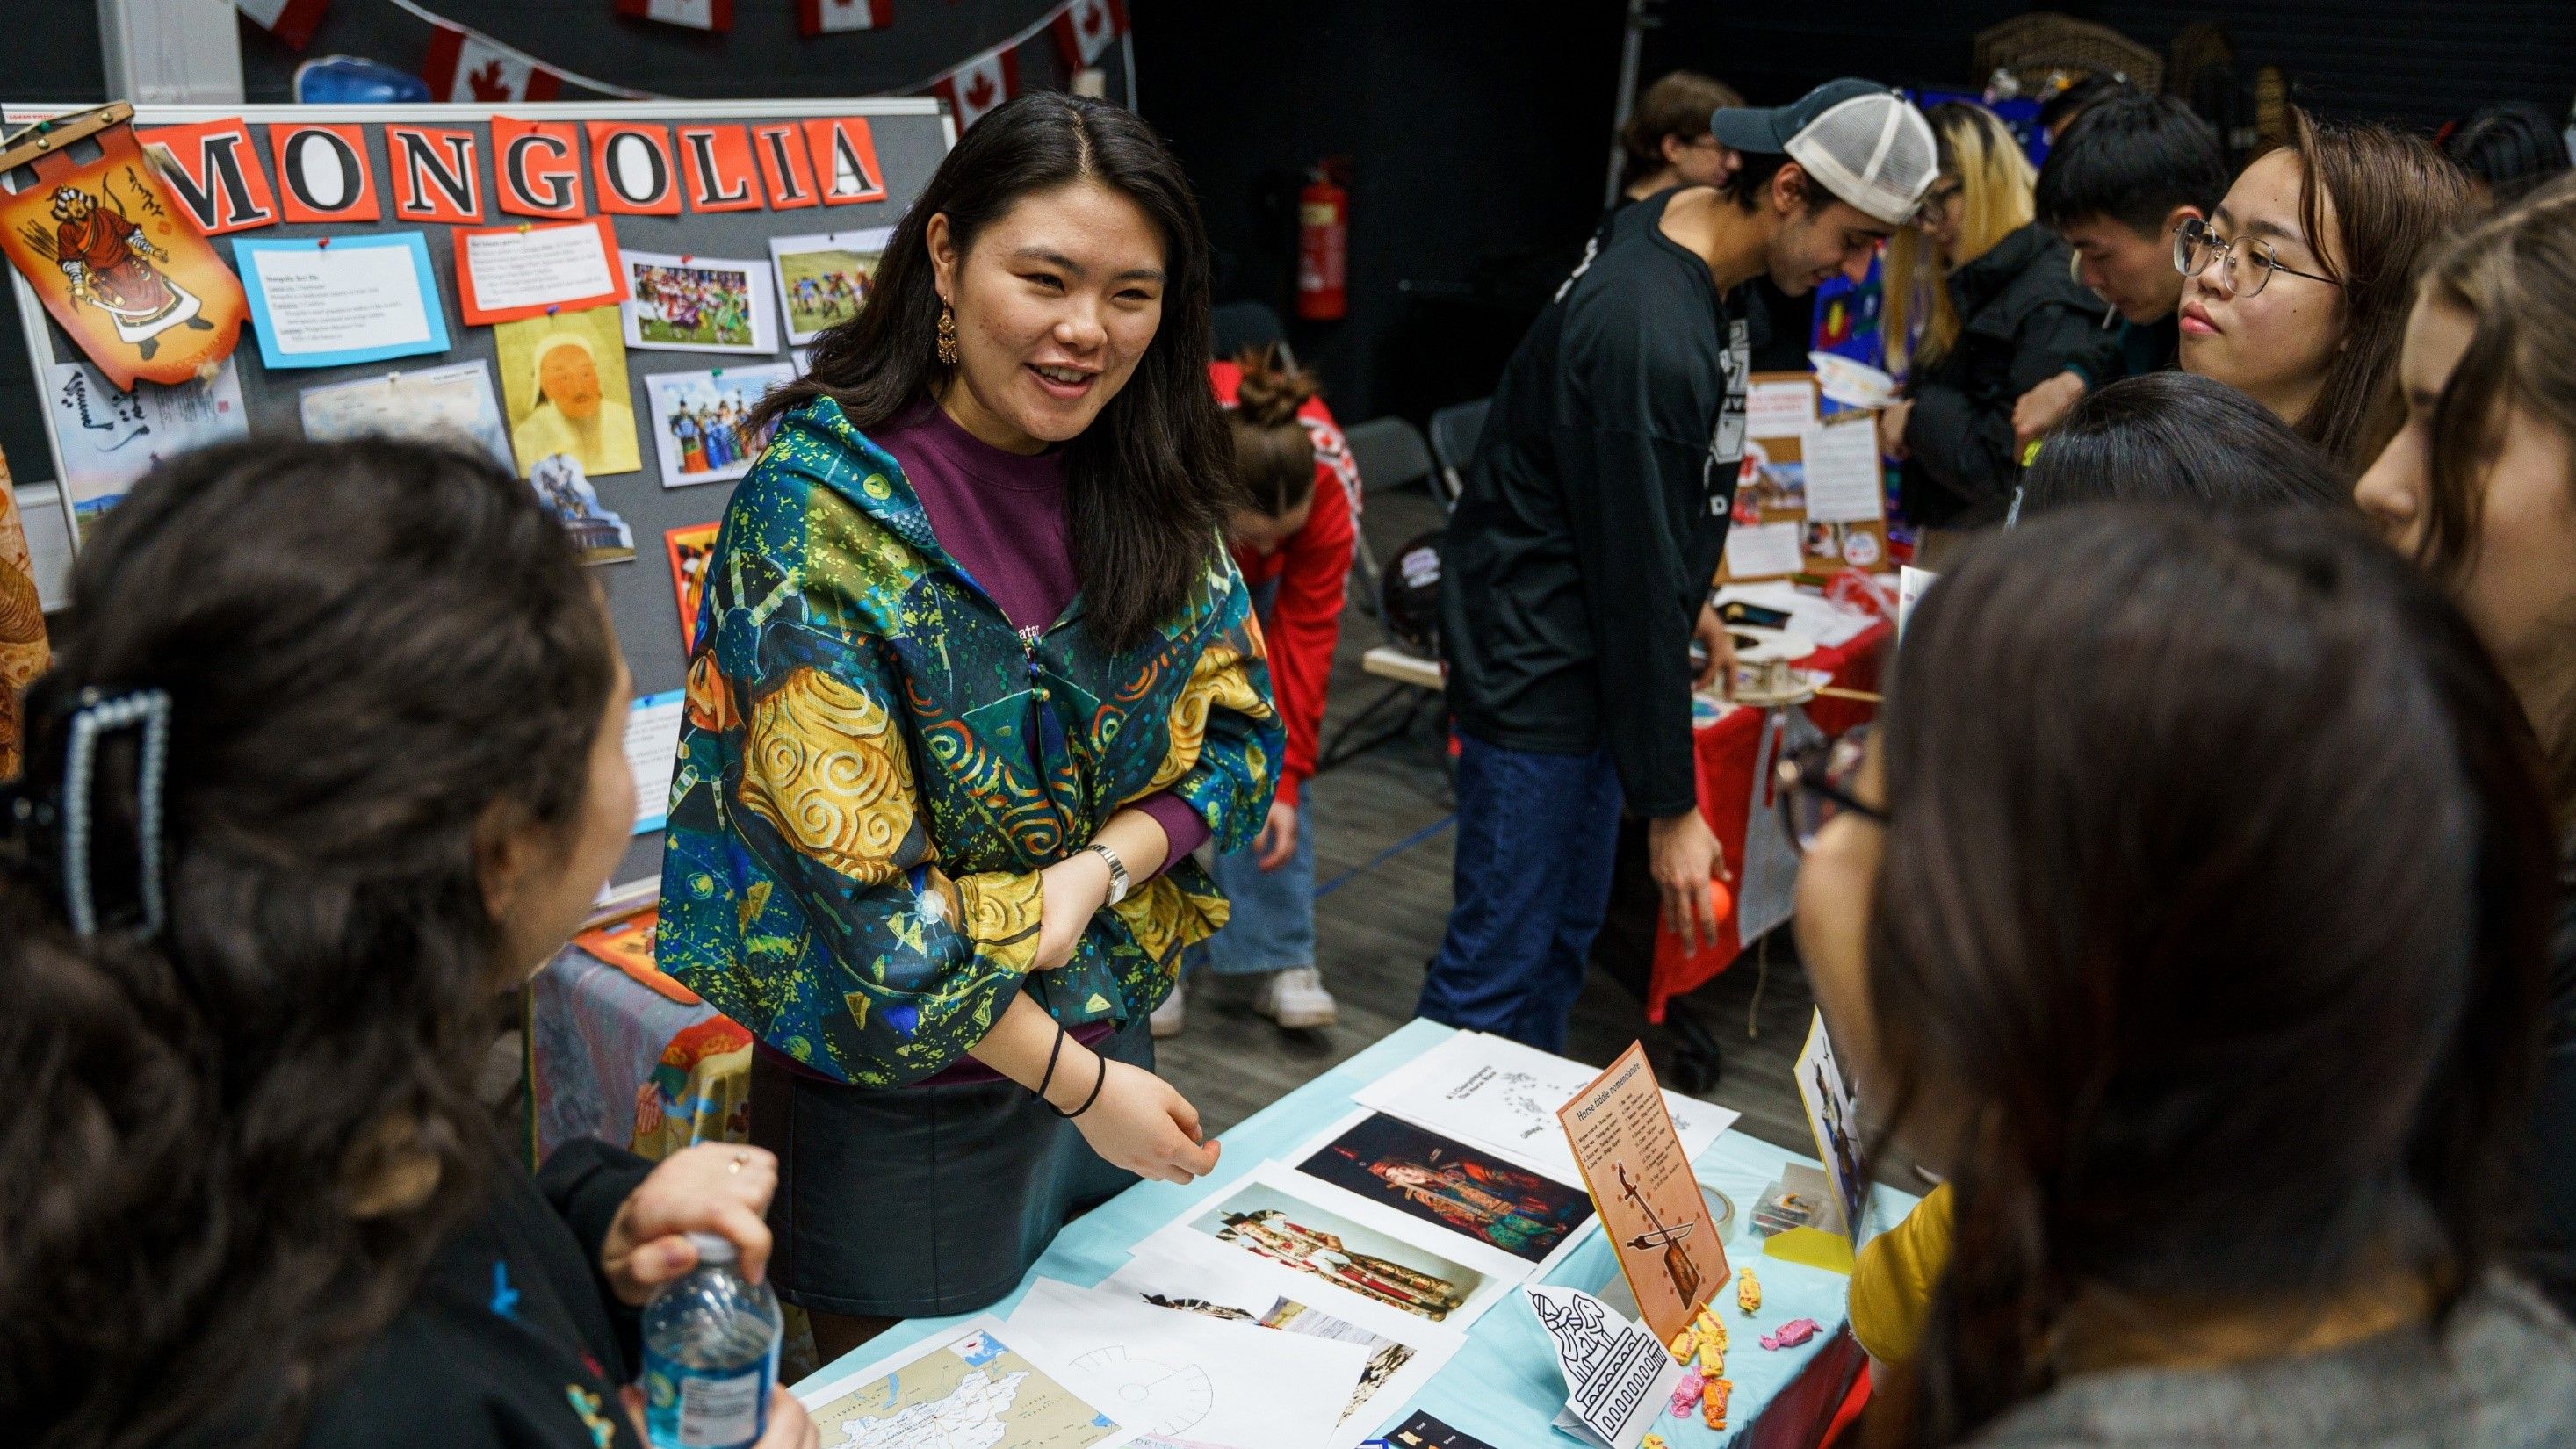 Students at the Mongolia stall at World Fest